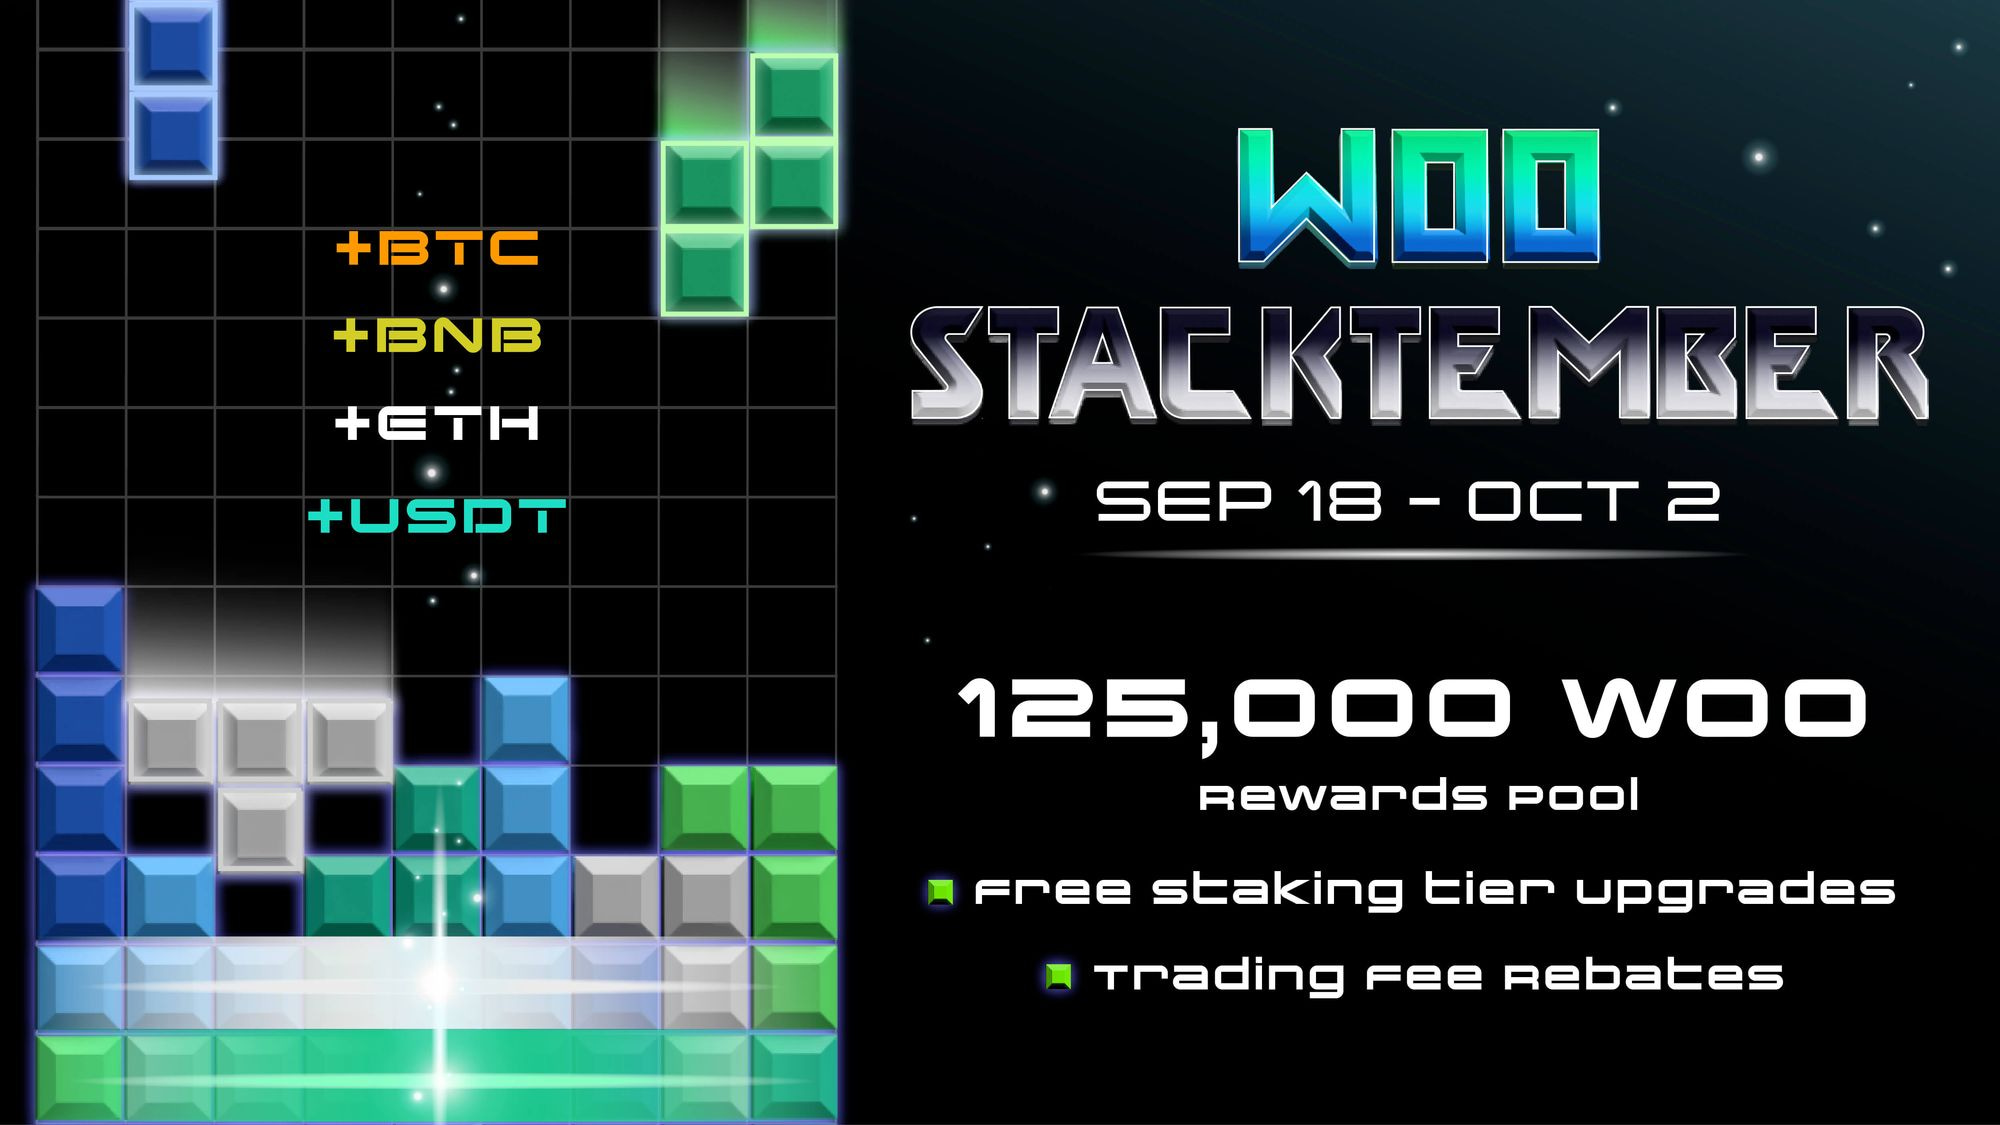 Stack your gains this Stacktember with WOO Earn!